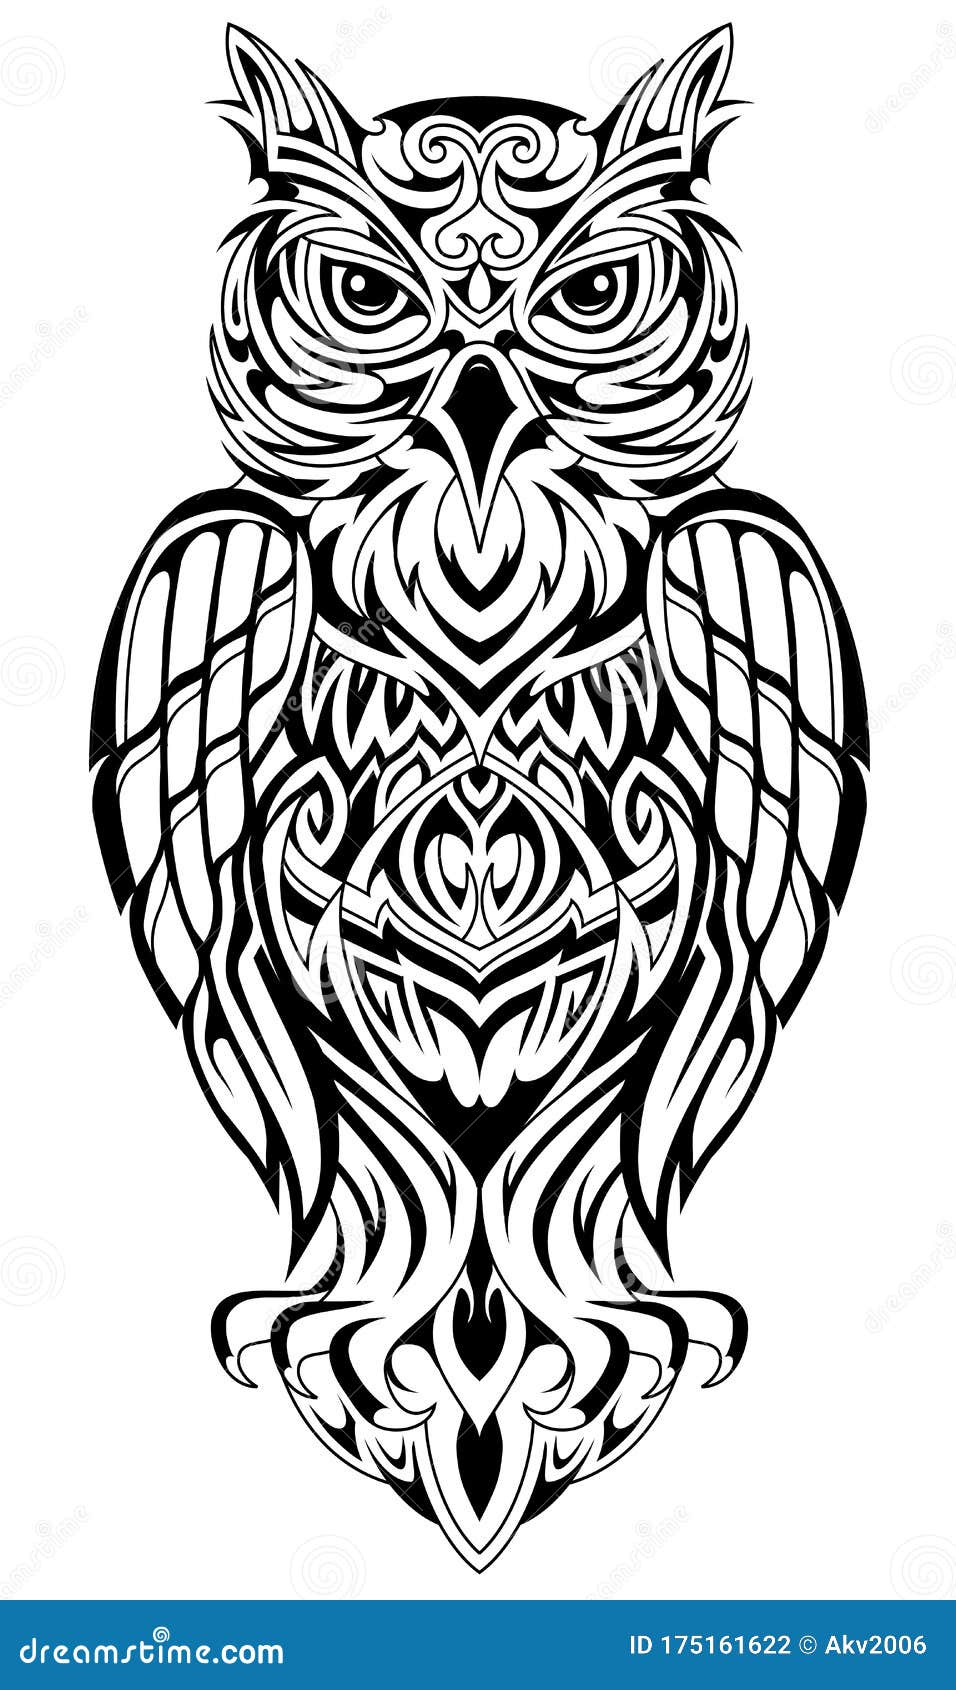 2279 Traditional Owl Tattoo Images Stock Photos  Vectors  Shutterstock